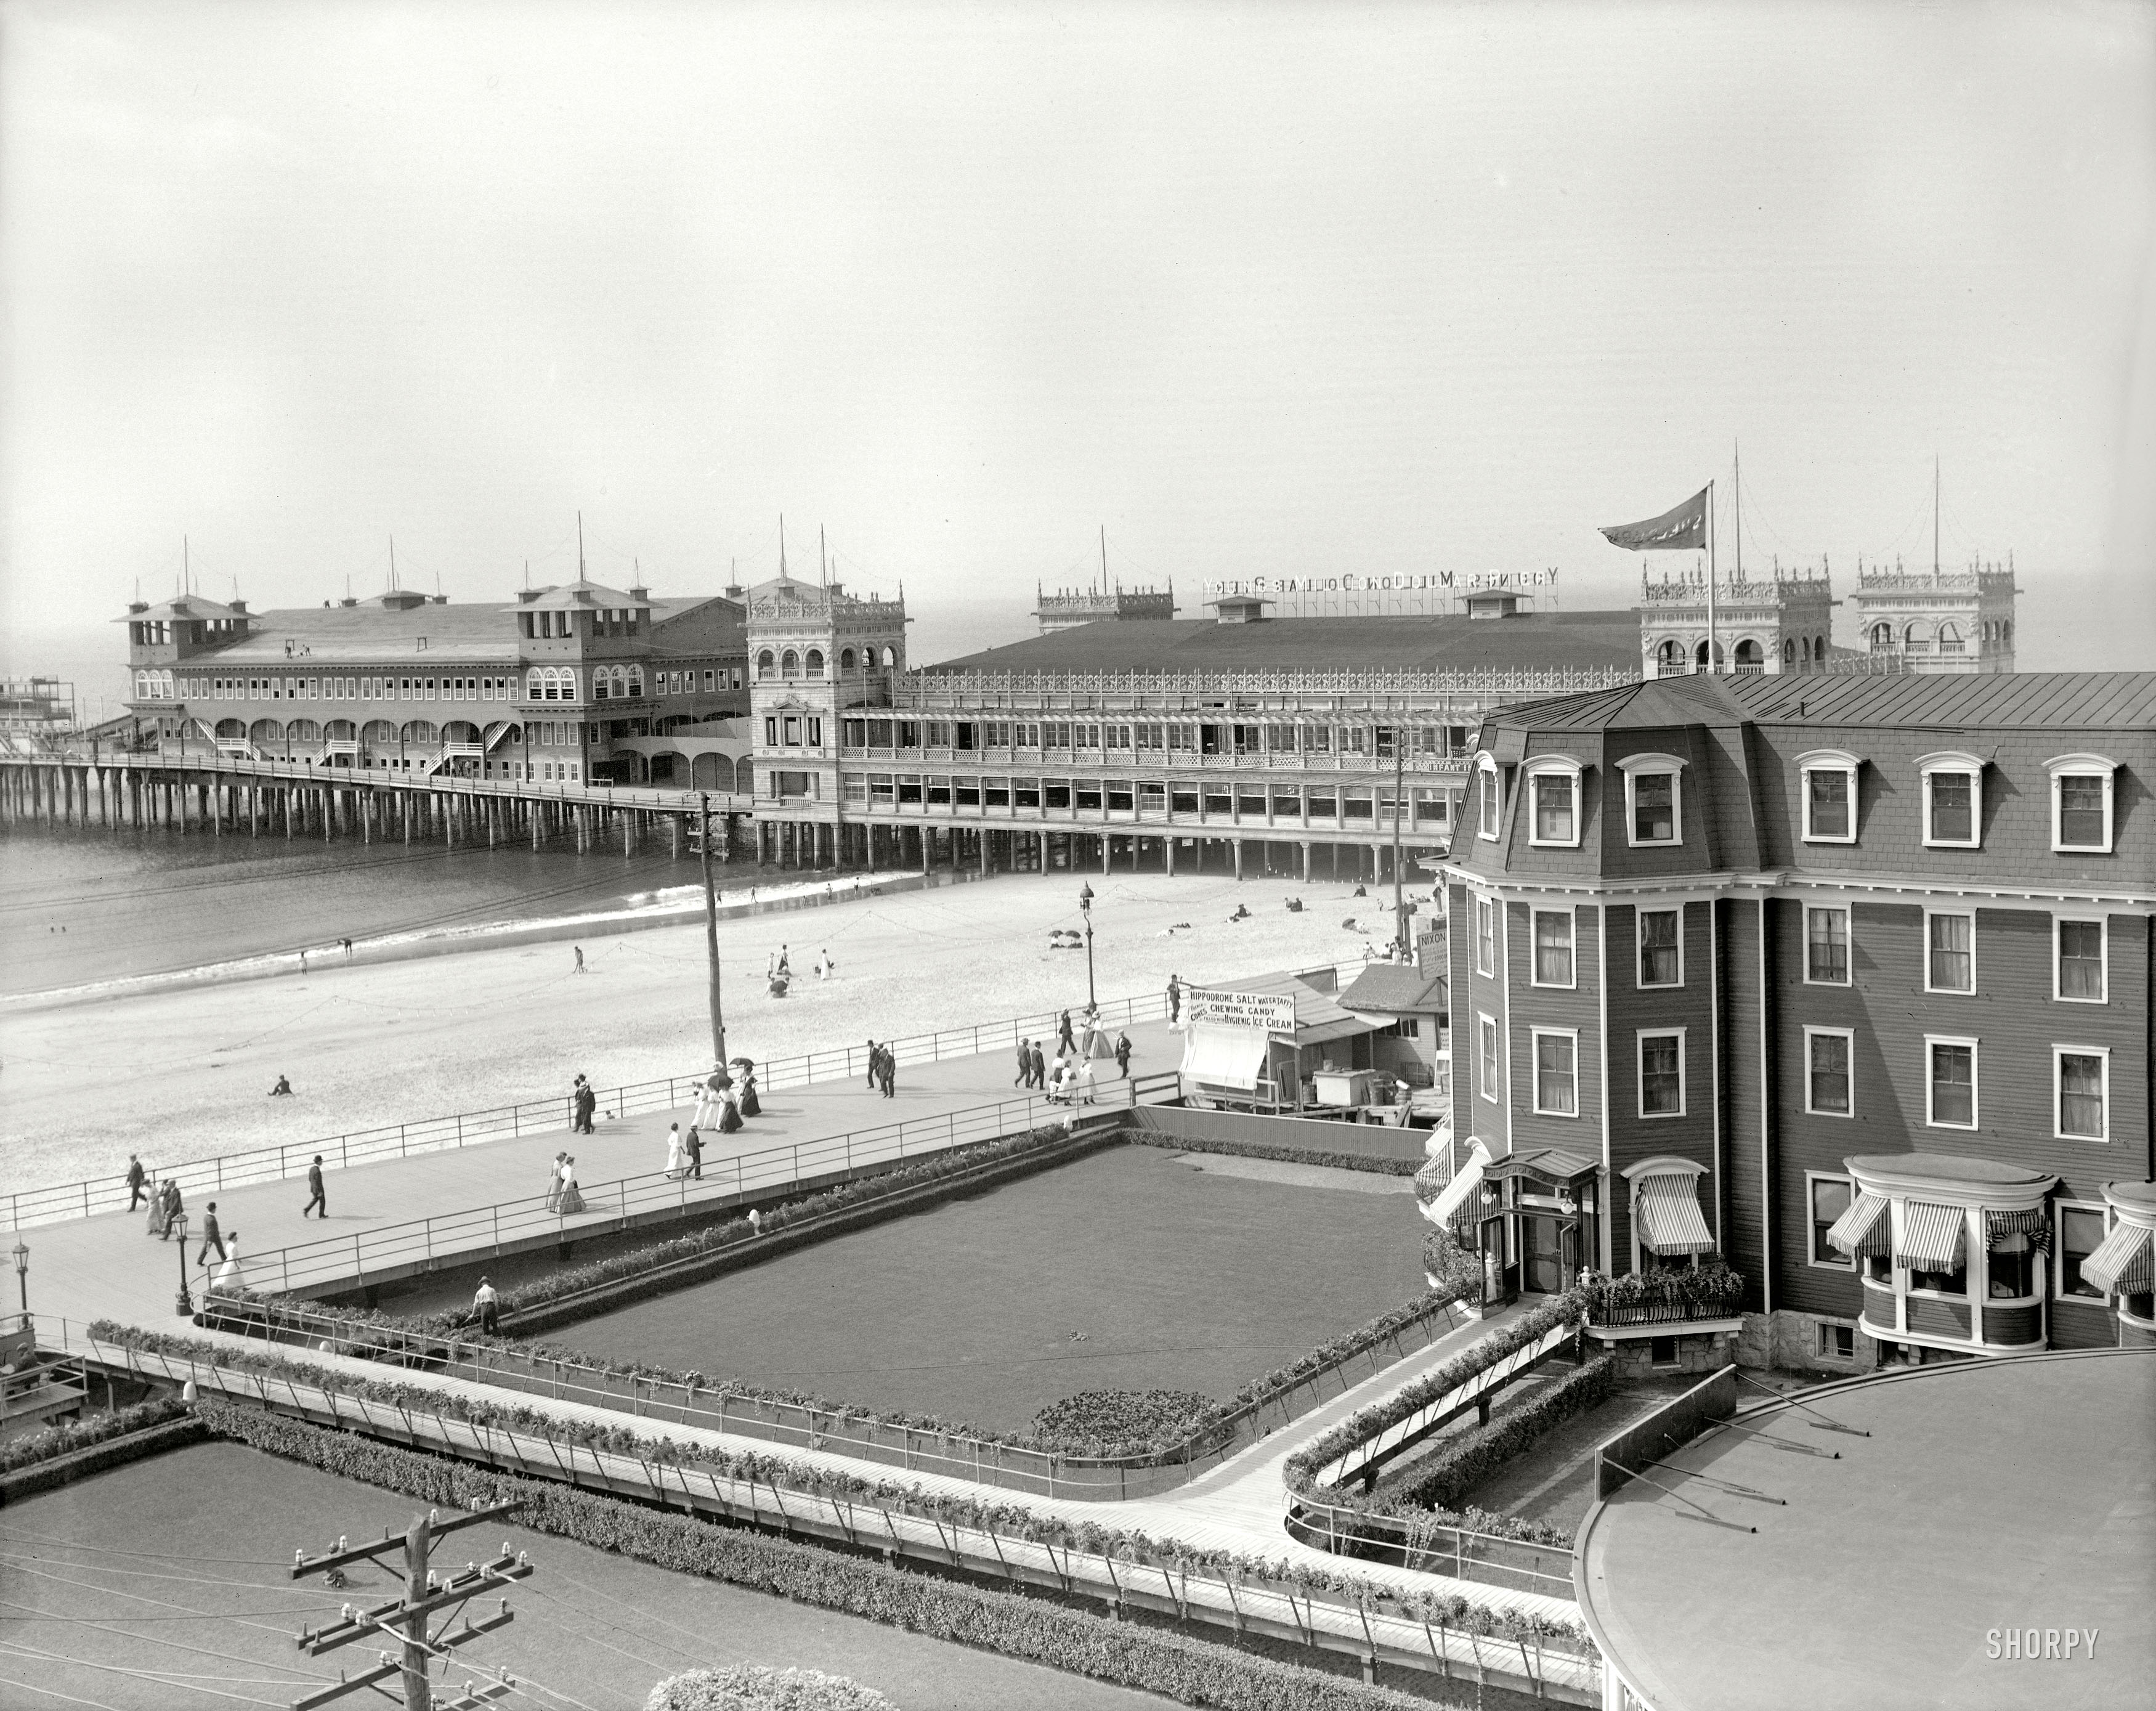 Glimpses of a lost world circa 1905. "Young's Million Dollar Pier, Atlantic City." 8x10 inch dry plate glass negative, Detroit Publishing Company. View full size.